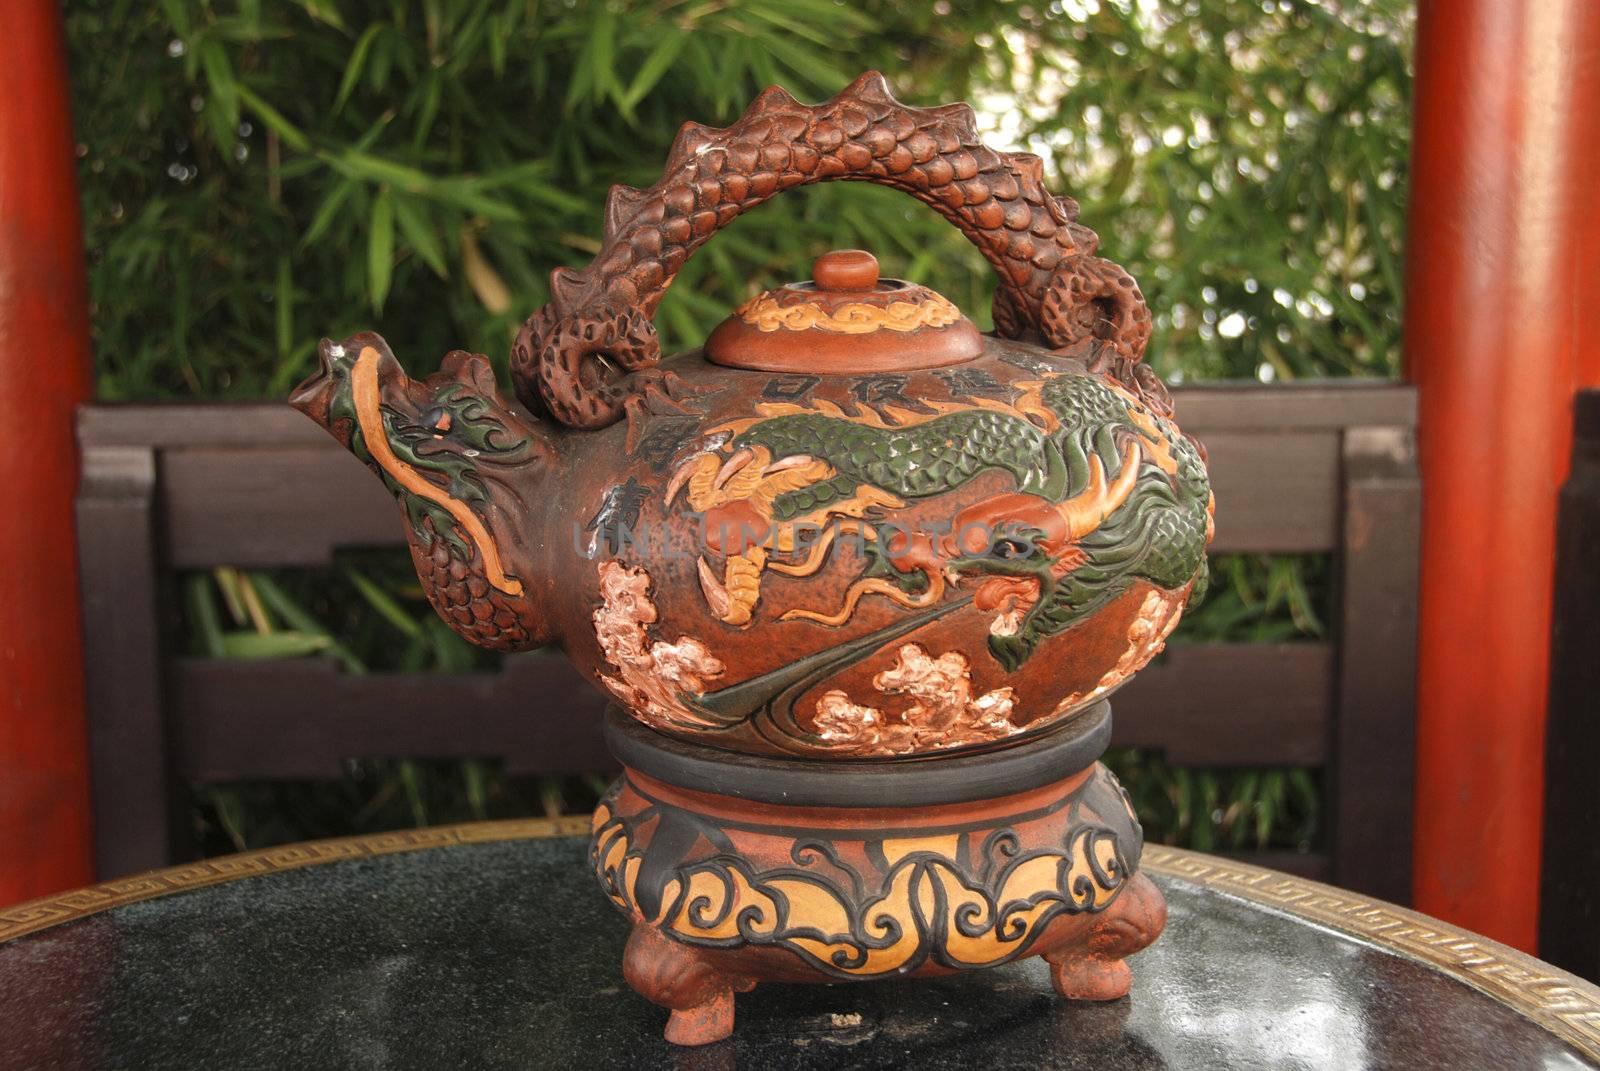 Traditional Chinese tea-kettle in the bamboo groove garden